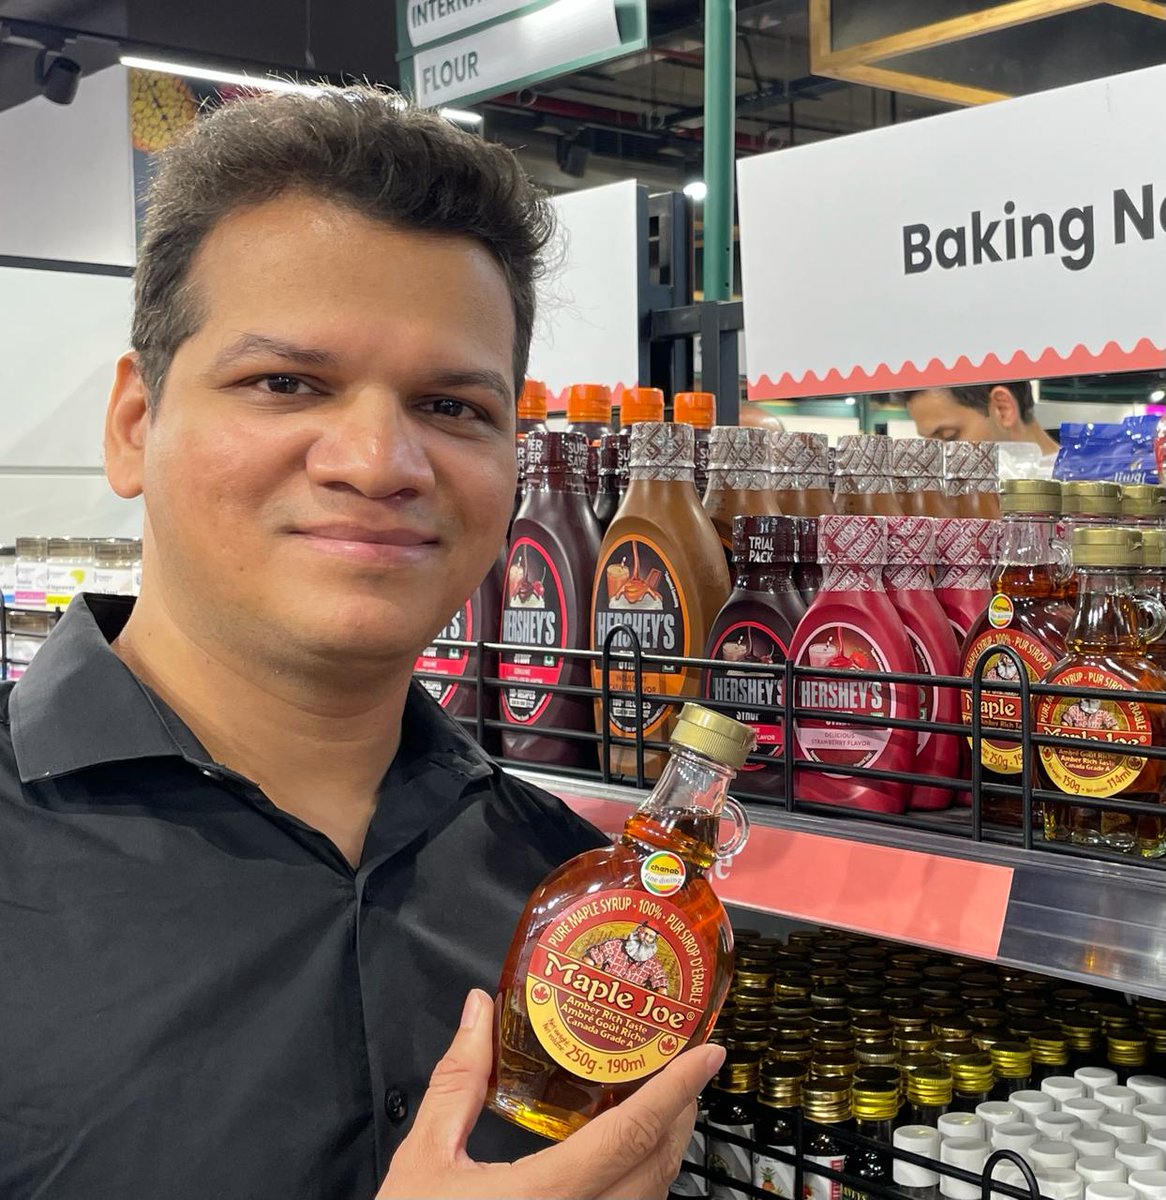 Our Trade commissioner Mr. @NikhilThorat was excited to find #MapleSyrup from #Quebec at @RelianceFreshIN Signature store at Infinity Oshiwara last Friday at its pre-launch soirée.

#bilateraltrade #agrifood #Maplestory